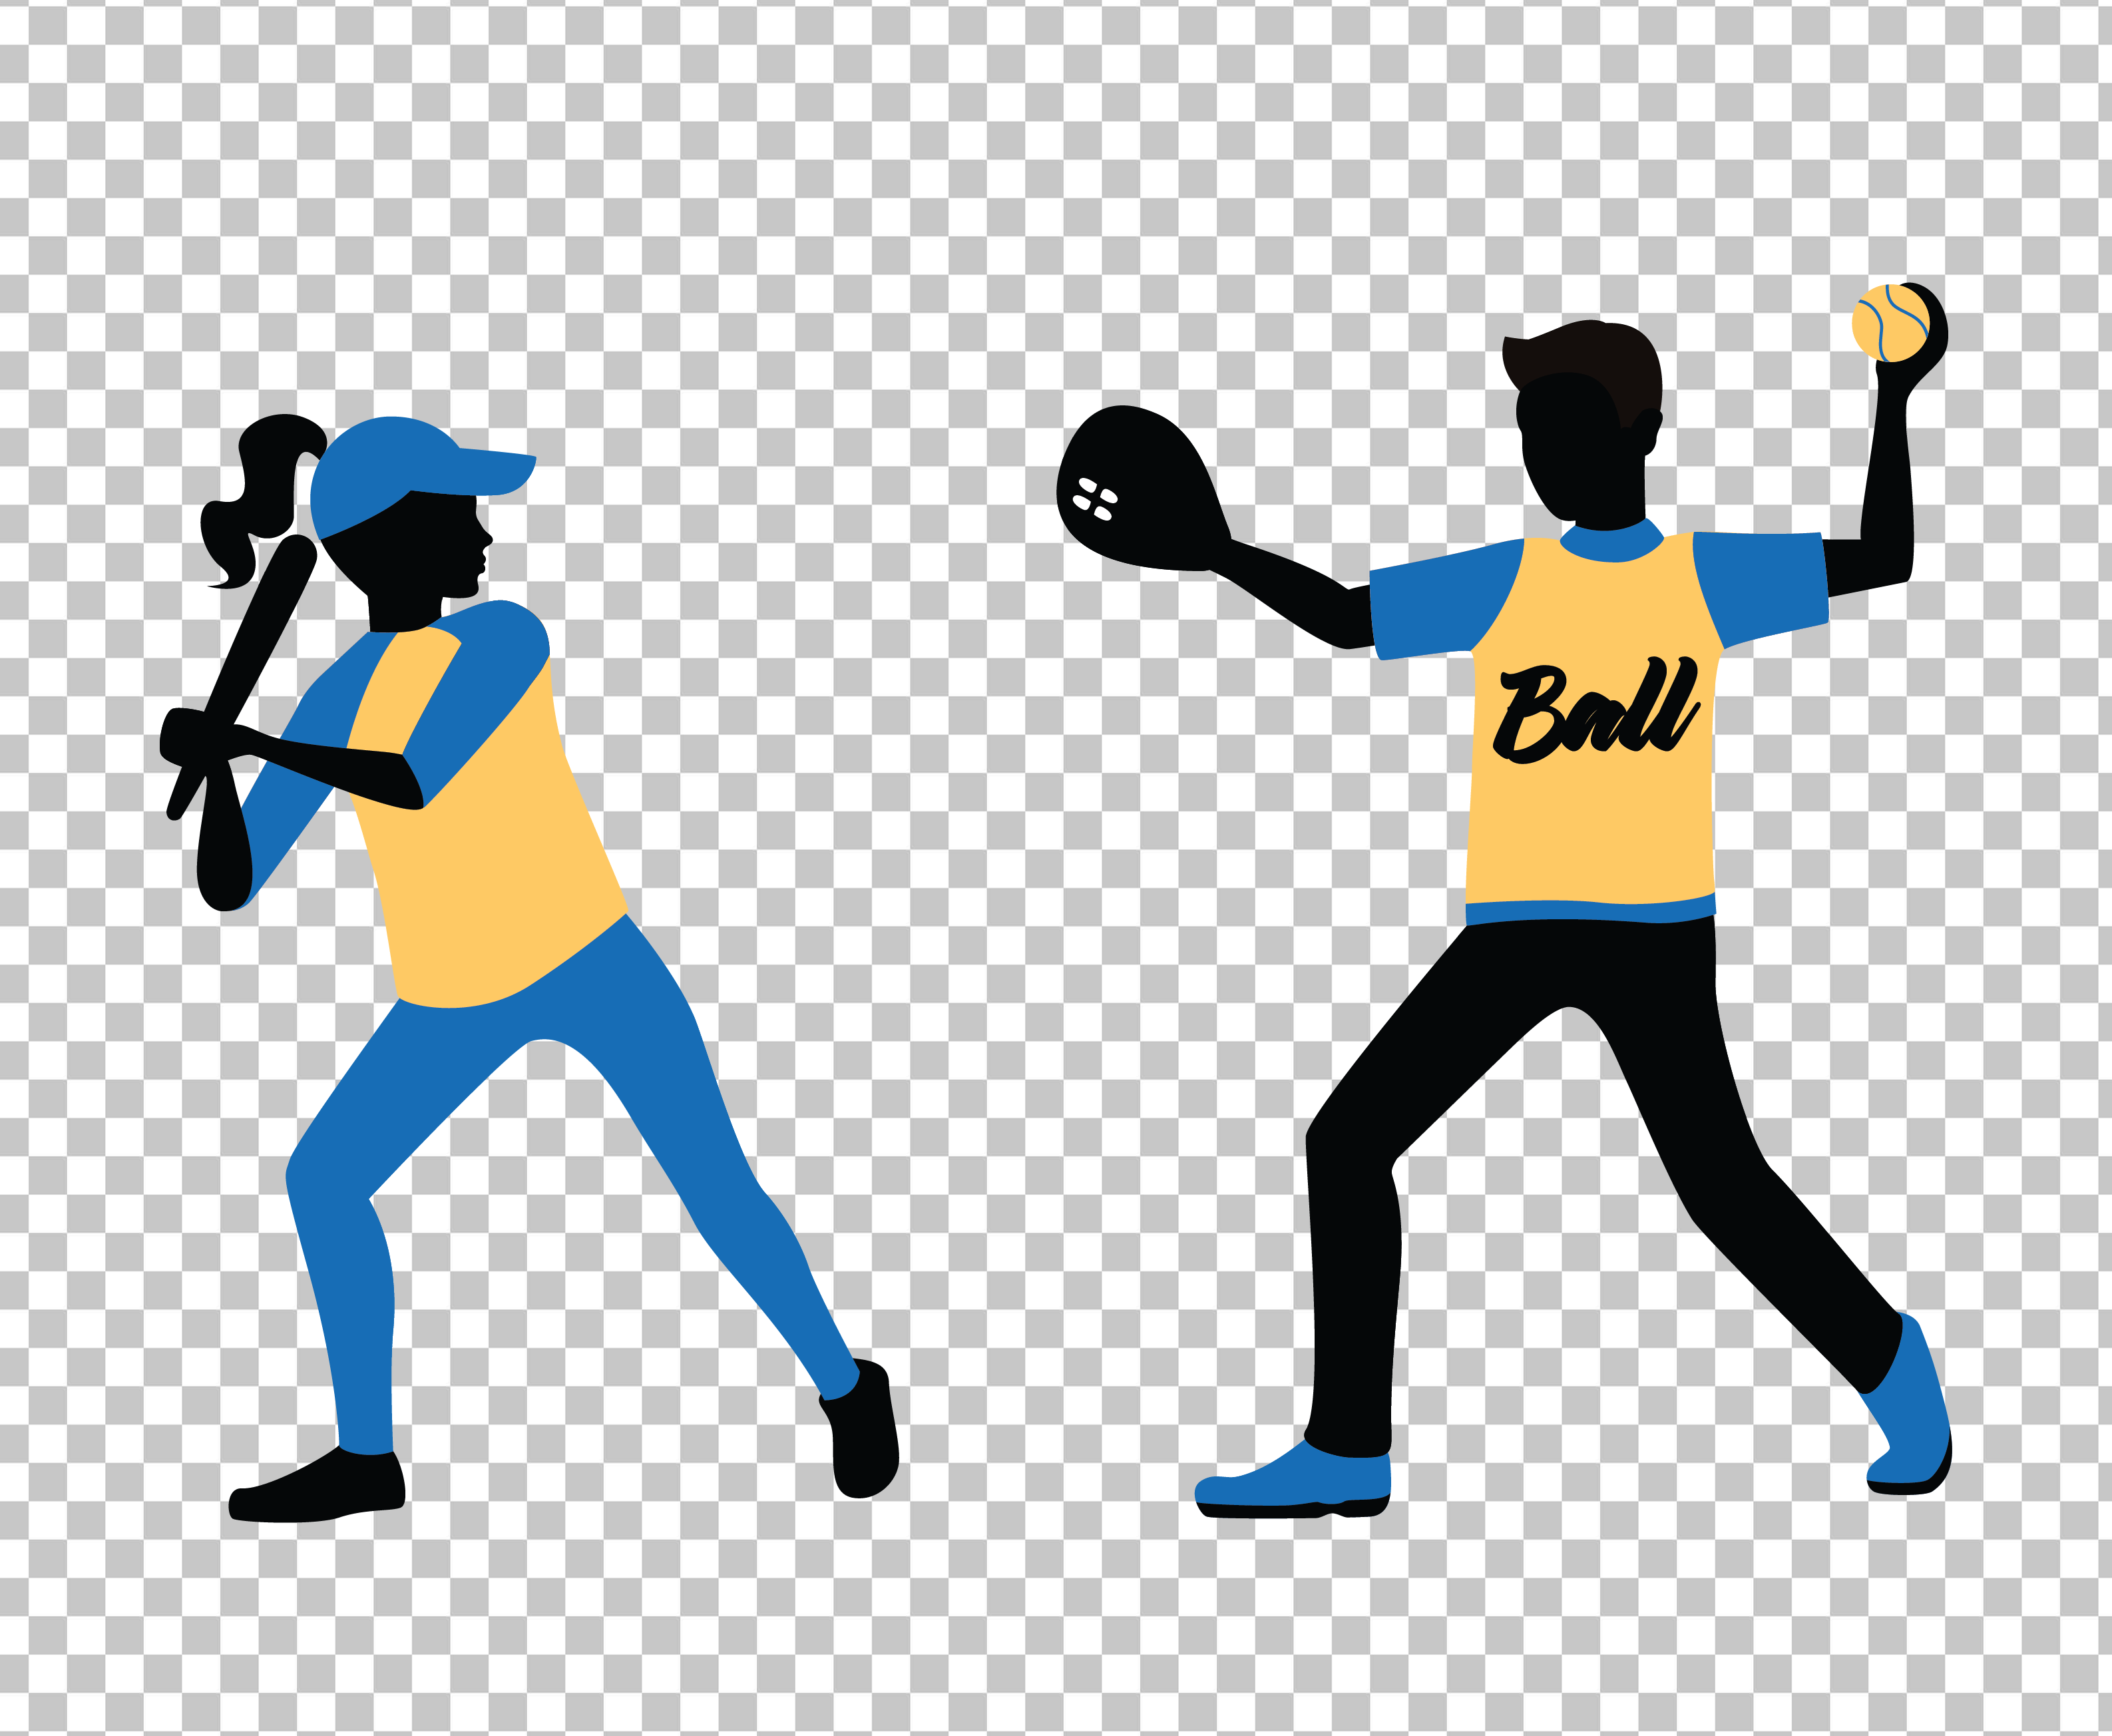 Baseball Players Silhouettes PNG Image